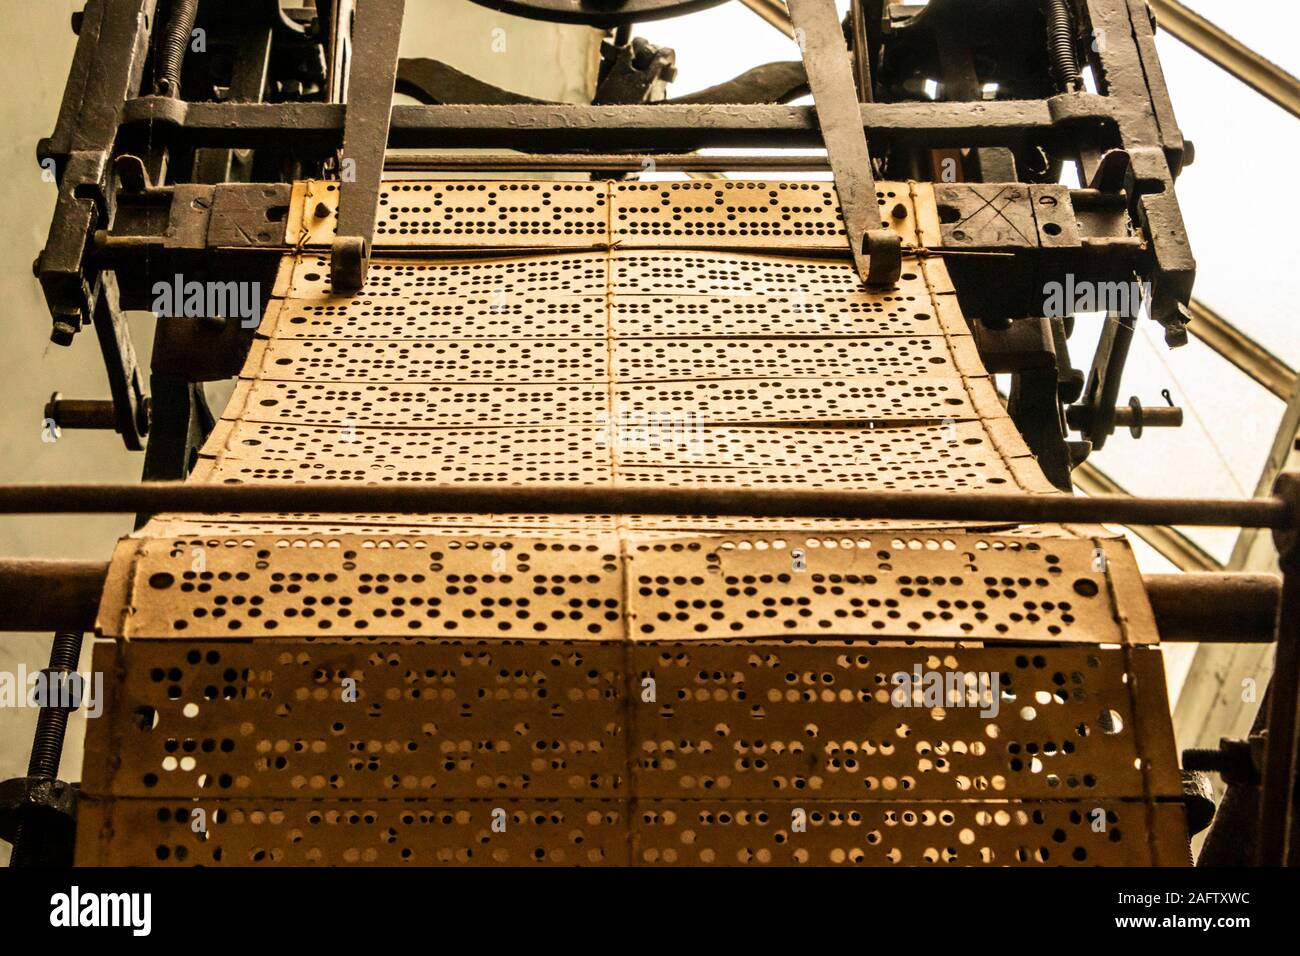 punched paper cards used for programming a jacquard loom in Sir Richard Arkwright's cotton and textile mill at Masson Mills Museum Derbyshire UK Stock Photo